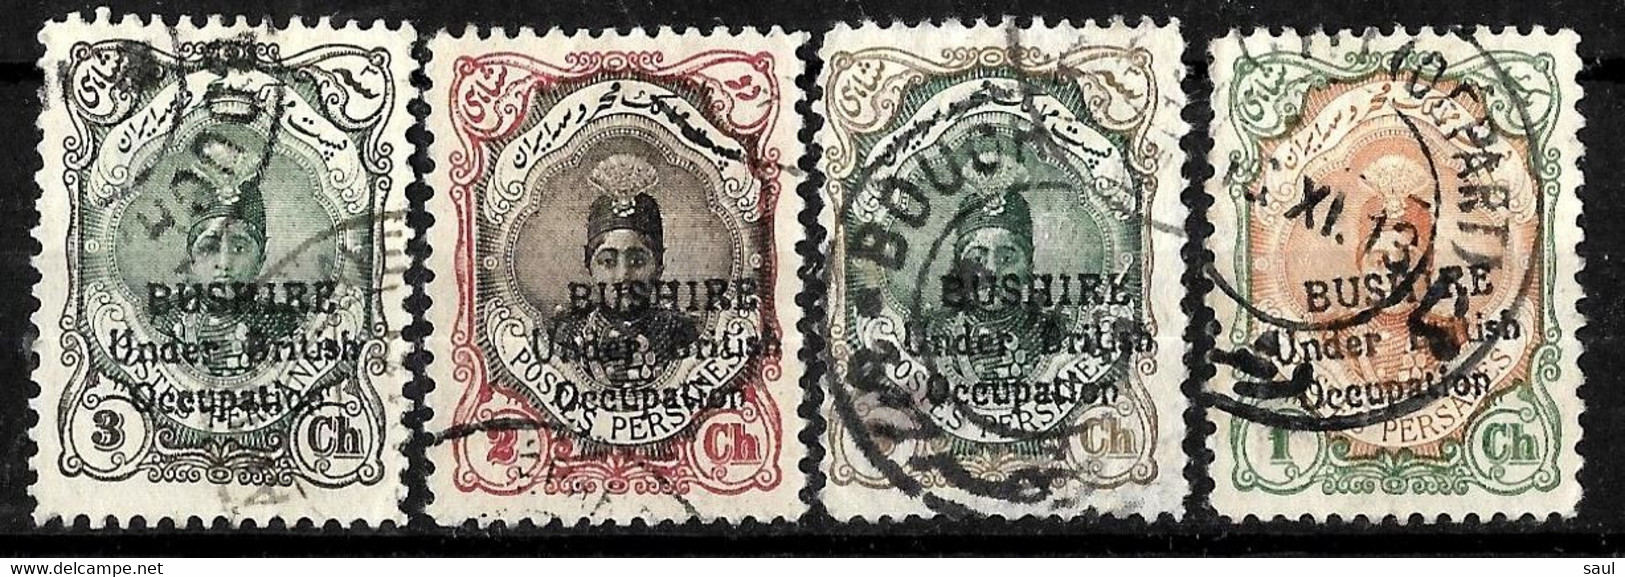 736 - IRAN - PERSE - 1915 -  RARE BUSHIRE OVERPRINT - CANCELLED -  FORGERIES, FALSES, FALSCHEN, FAUX - Collections (without Album)